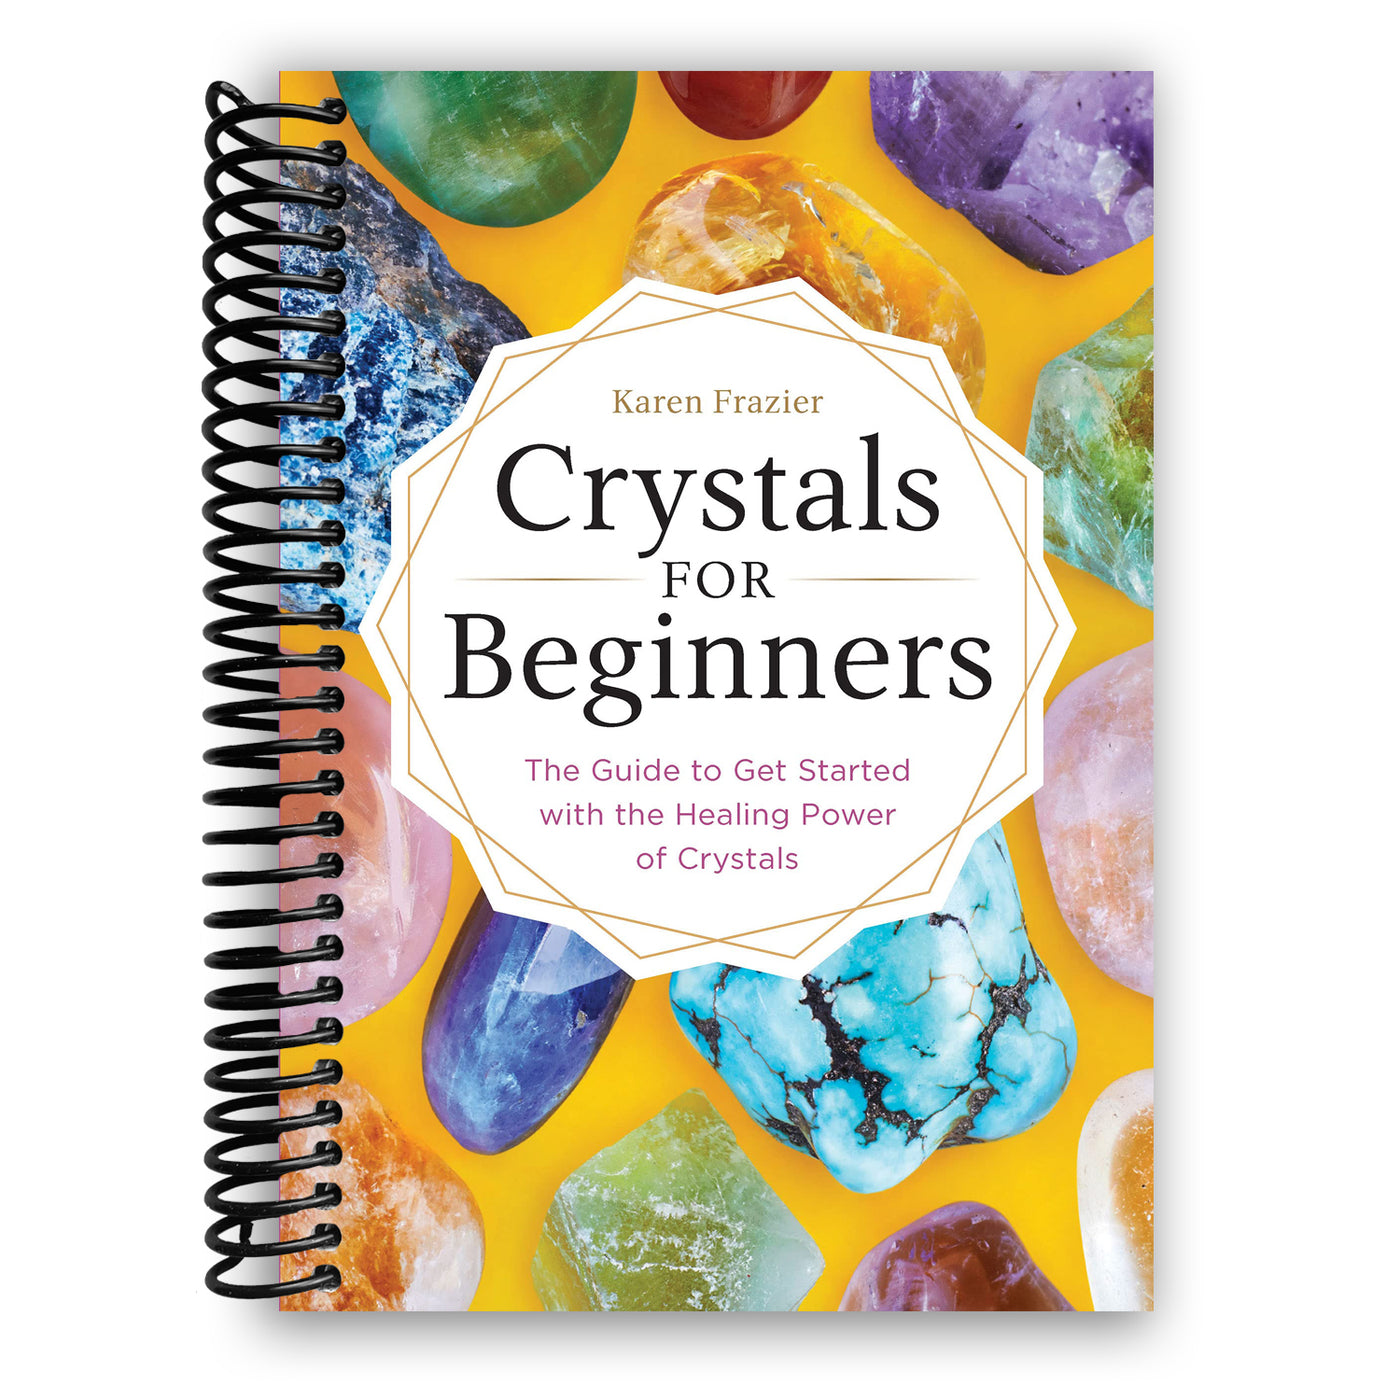 Crystals for Beginners: The Guide to Get Started with the Healing Power of Crystals (Spiral Bound)